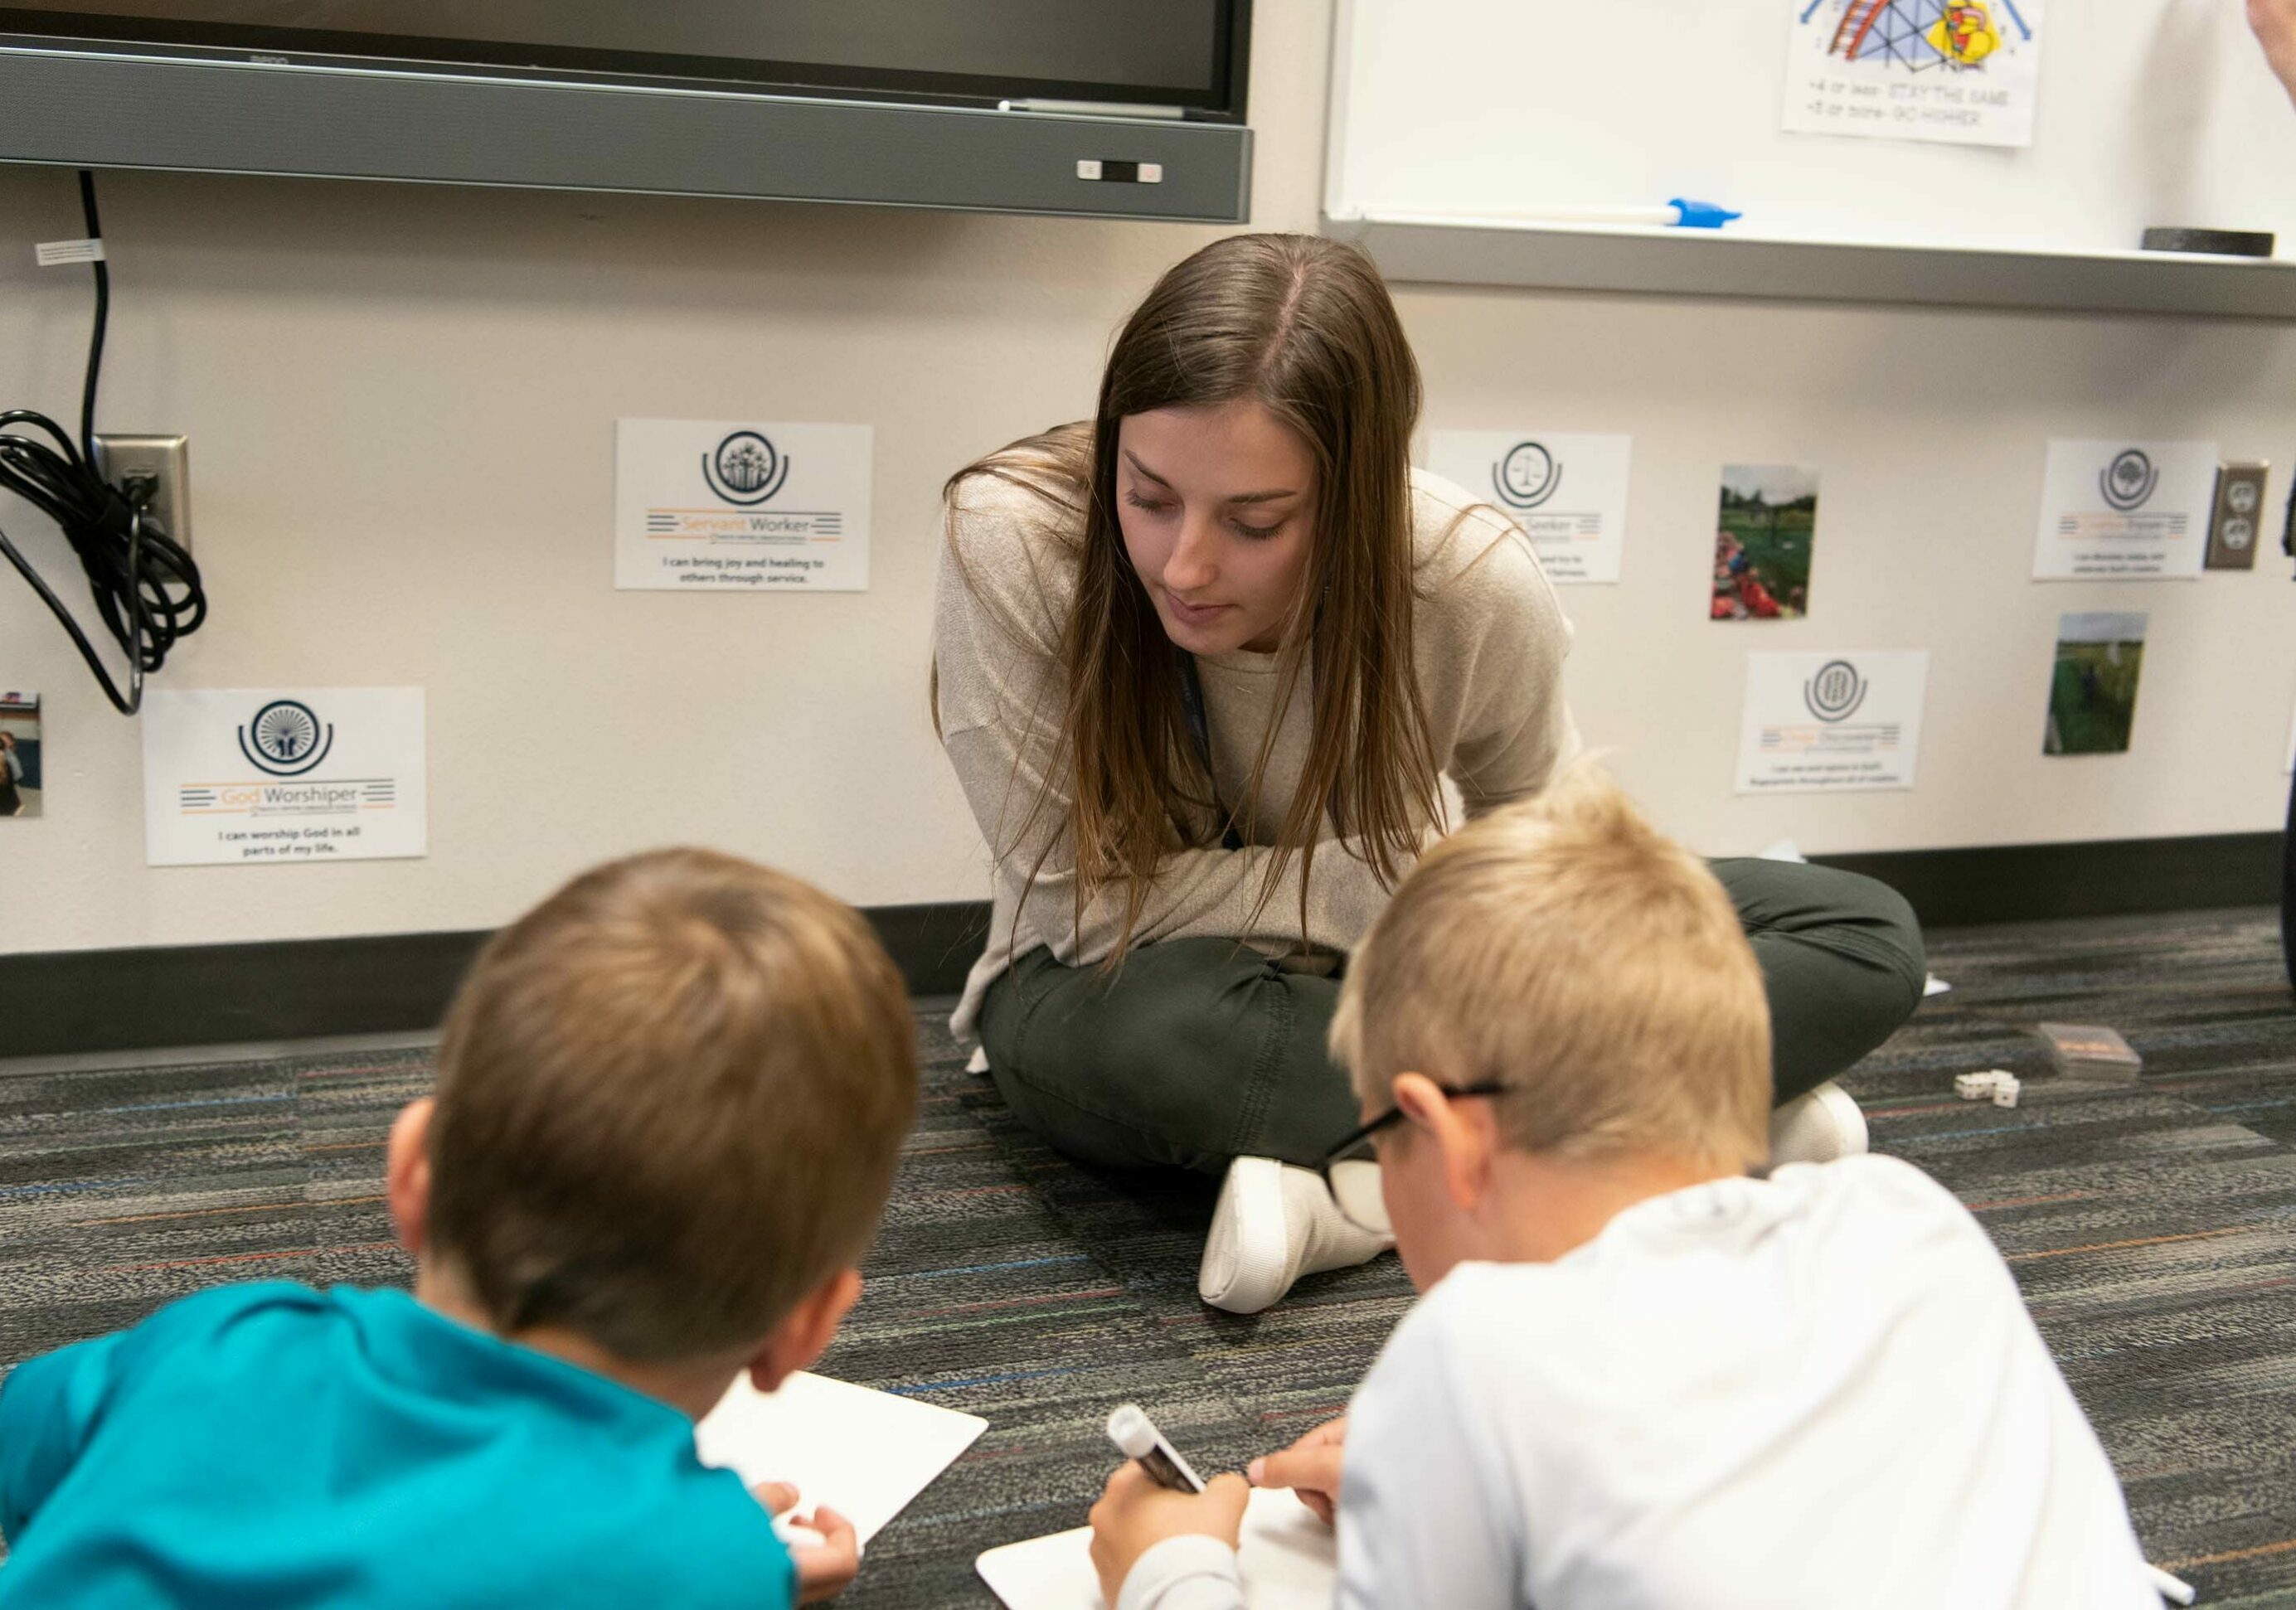 A Dordt student leans over two young students in class as they work on math